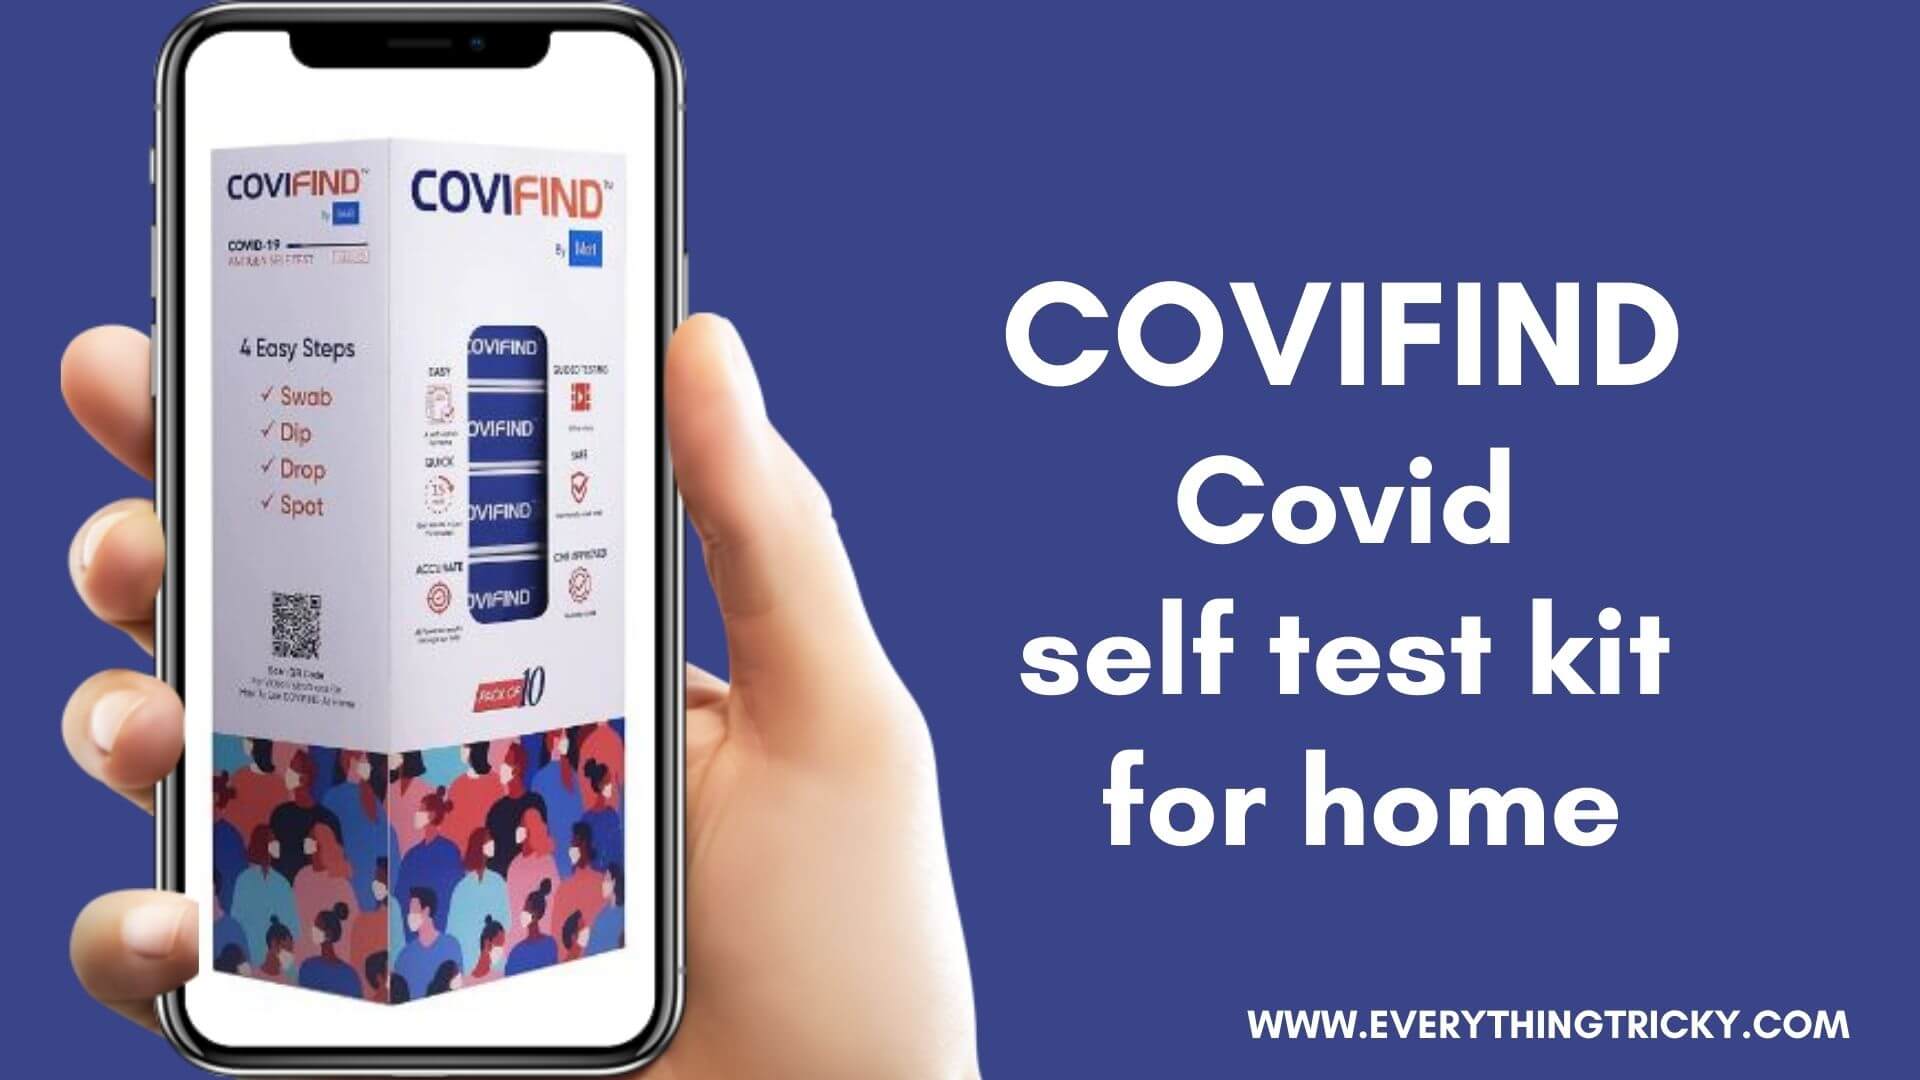 Covid self test kit for home